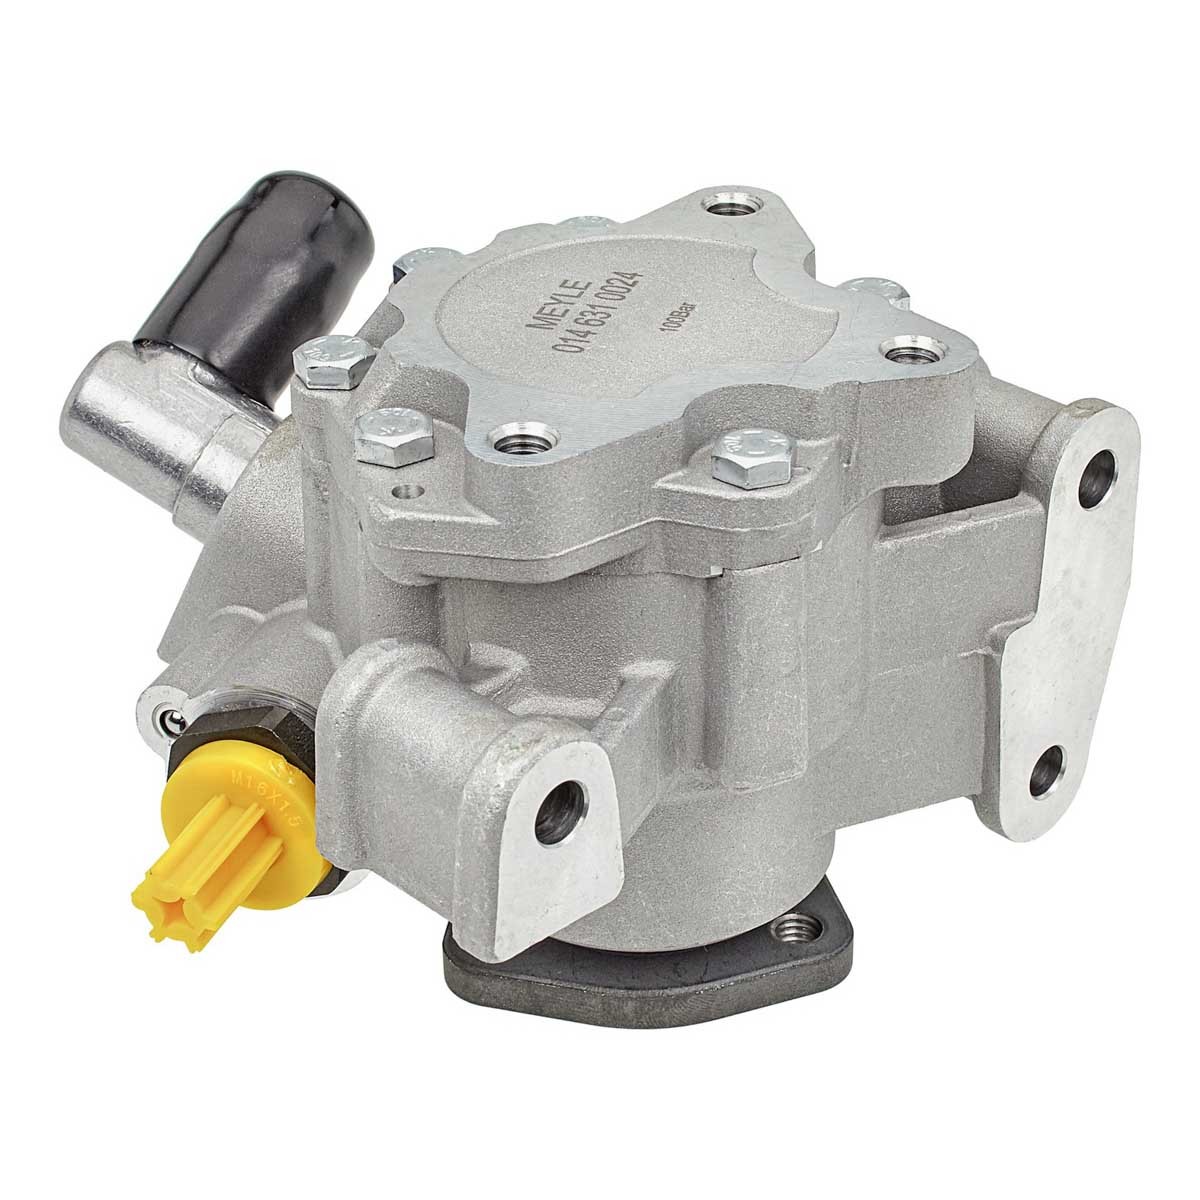 MEYLE Hydraulic steering pump 014 631 0024 suitable for MERCEDES-BENZ G-Class, ML-Class